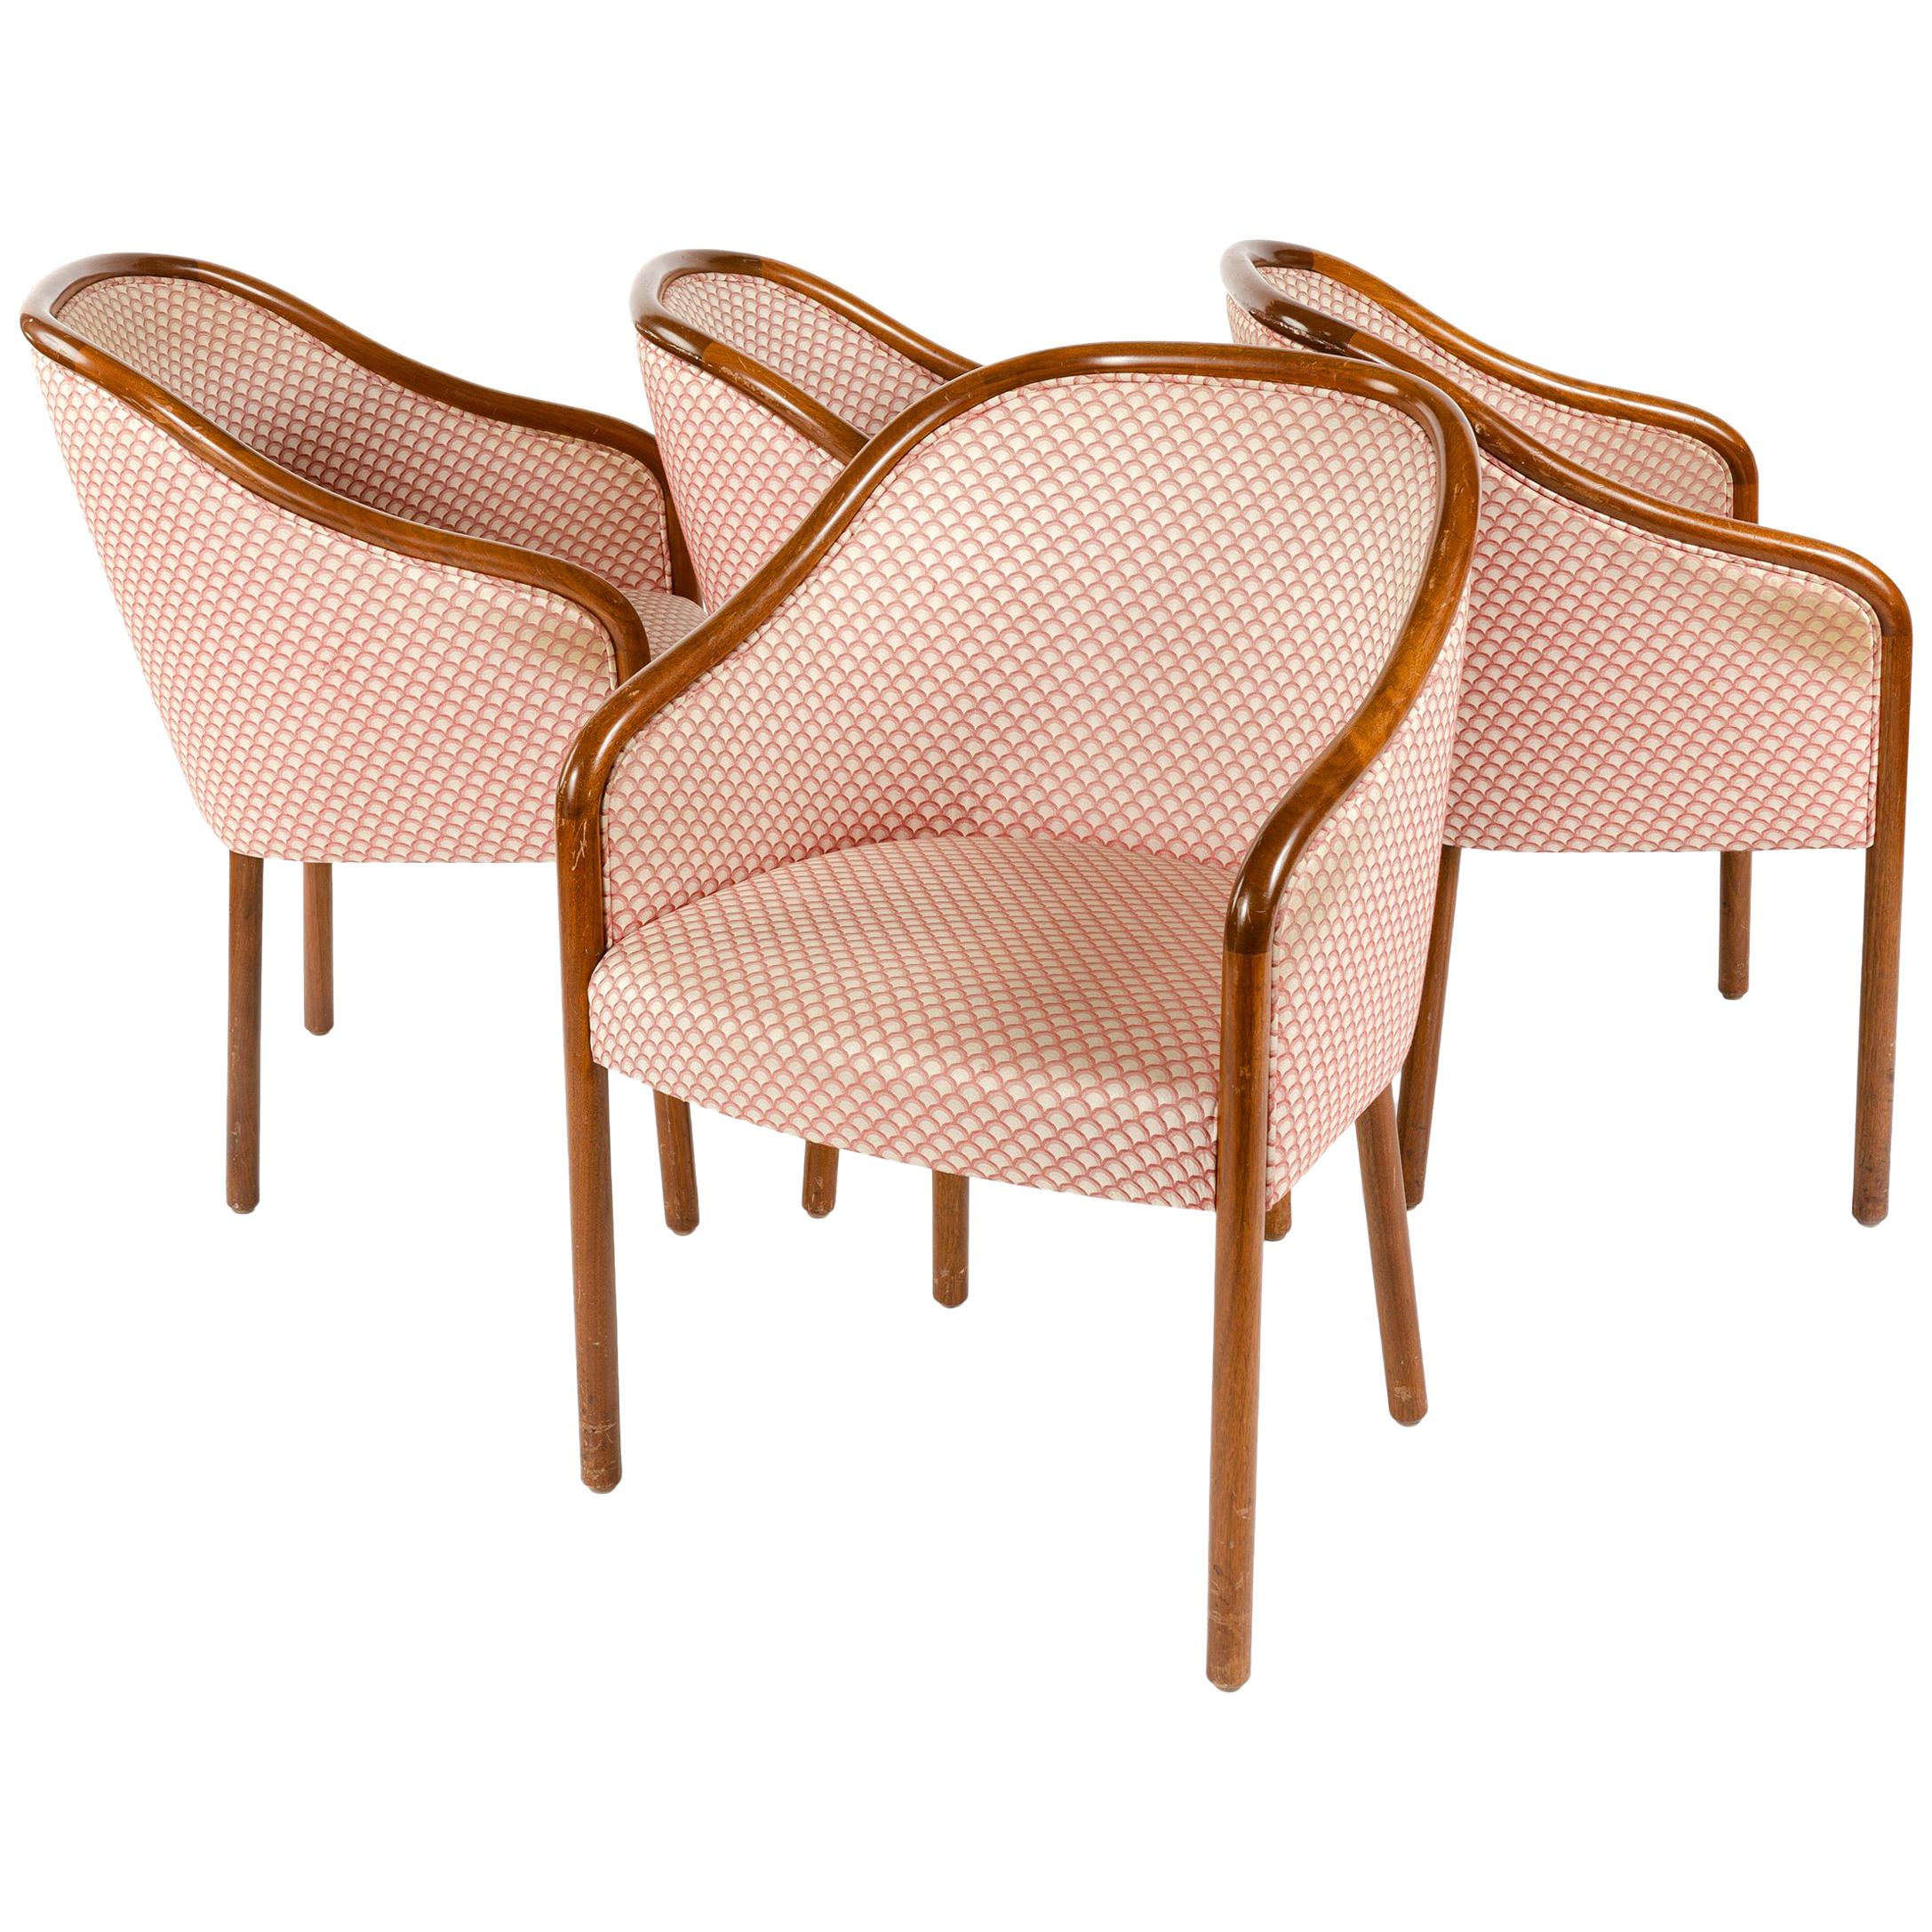 Set of 4 Chairs by Ward Bennett for Brickel Associates